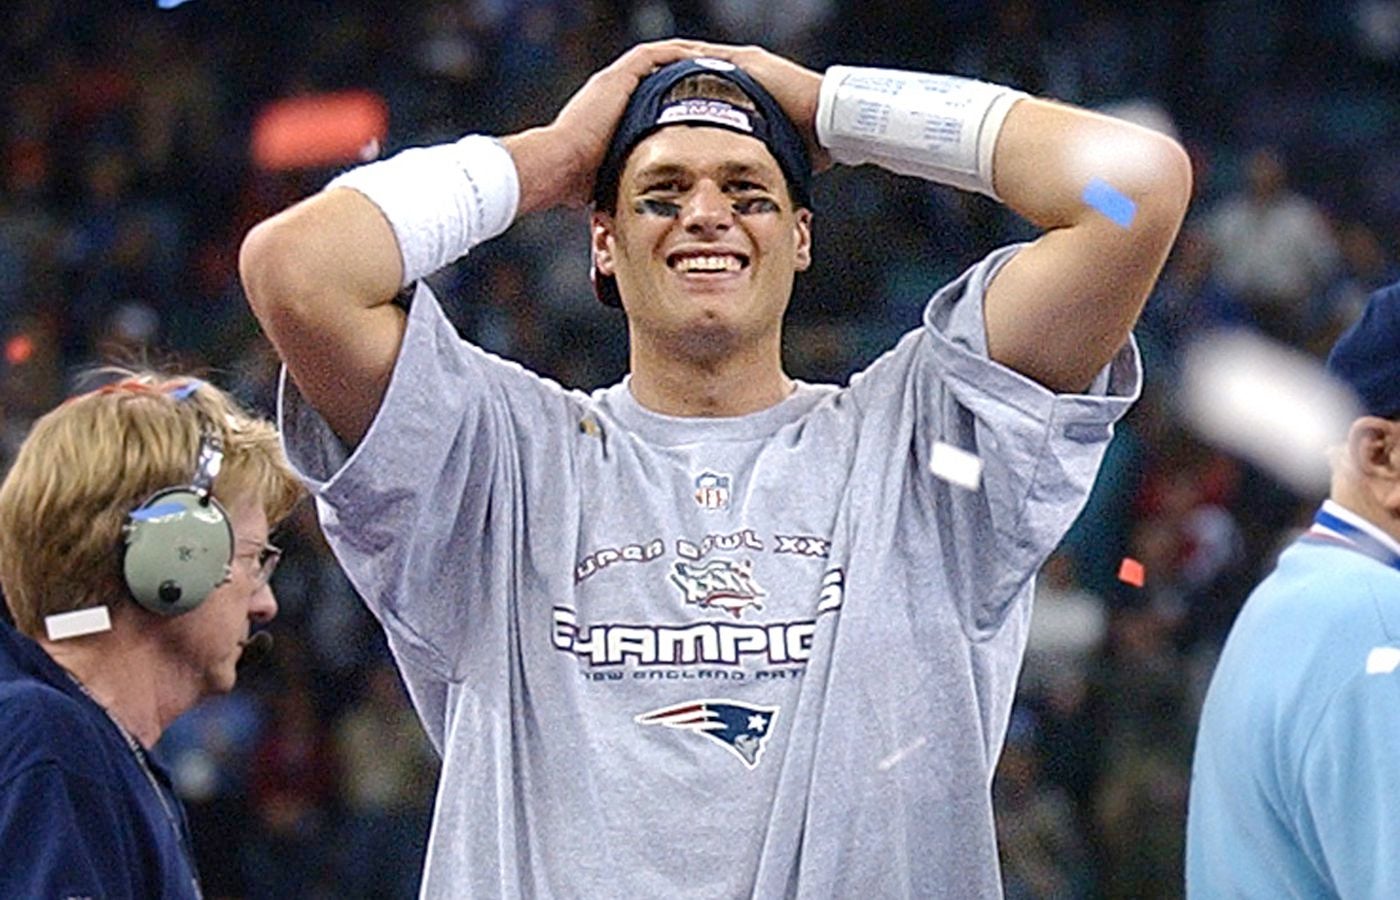 The last time the Patriots were such heavy underdogs? Super Bowl XXXVI  against the Rams in 2002.